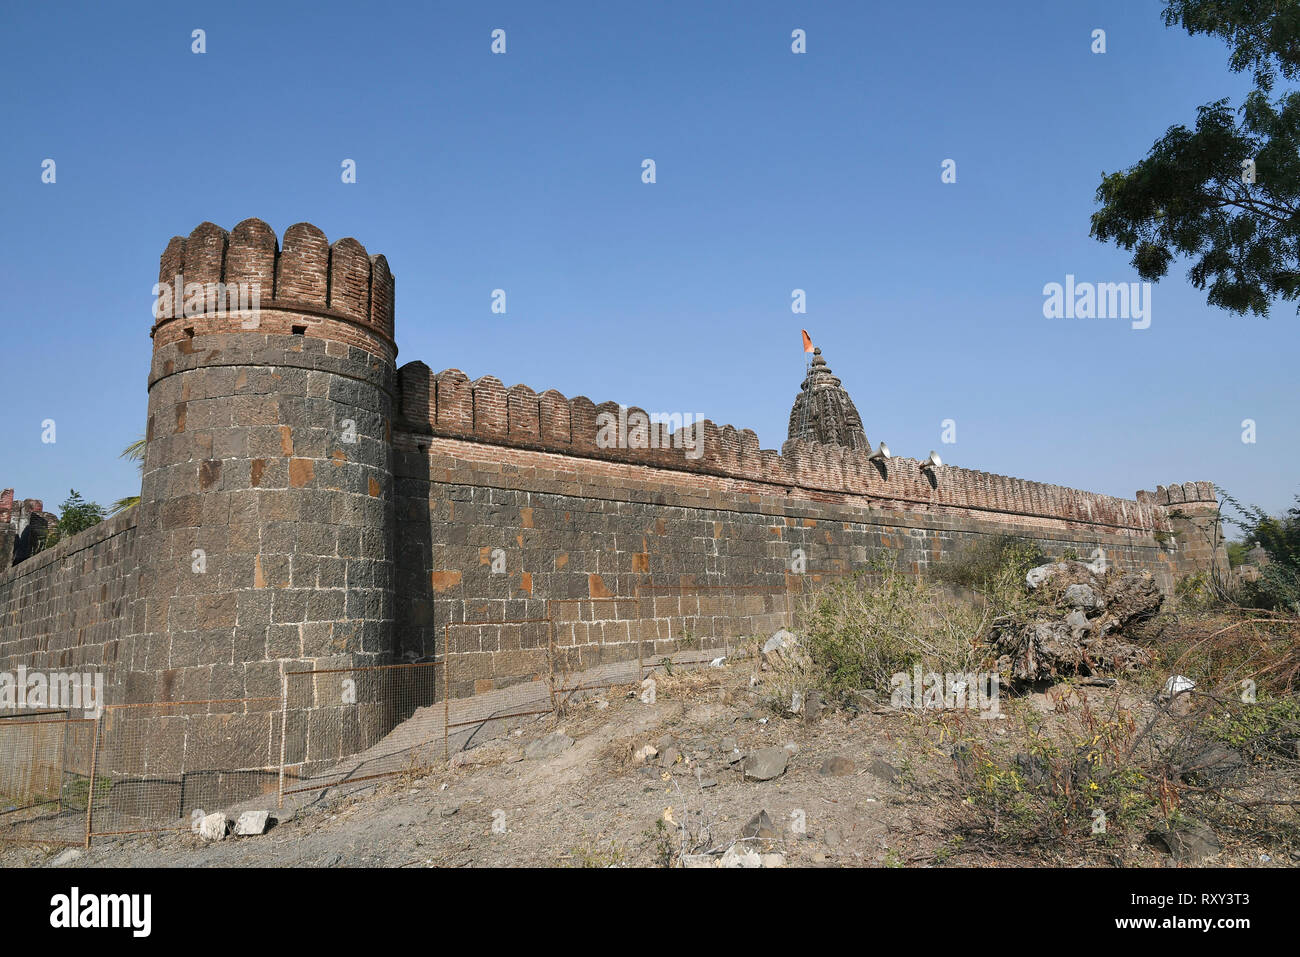 Stone masonry wall with Cylindrical watch towers at intervals surrounding entire village of  Vitthal Temple, Palashi, Parner, Ahmednagar. Stock Photo